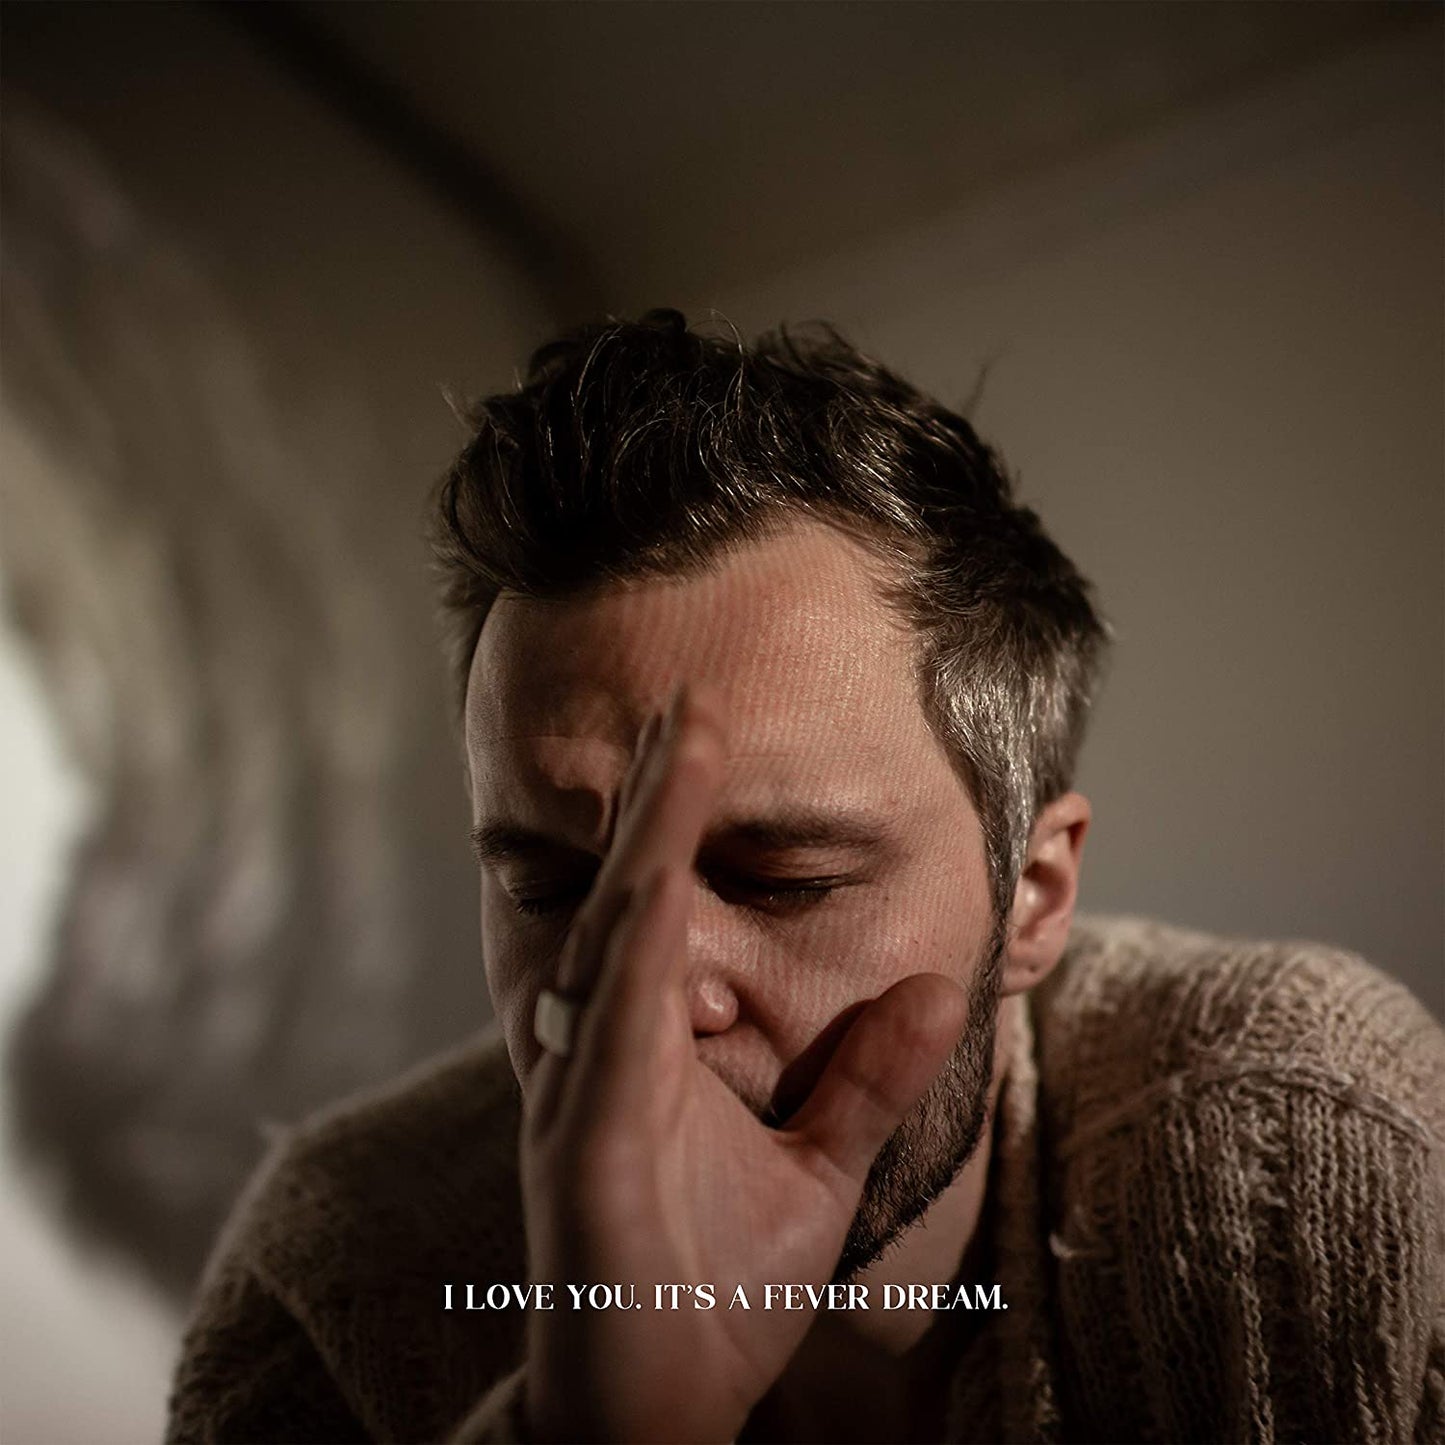 Tallest Man On Earth/I Love You, It's A Fever Dream [CD]